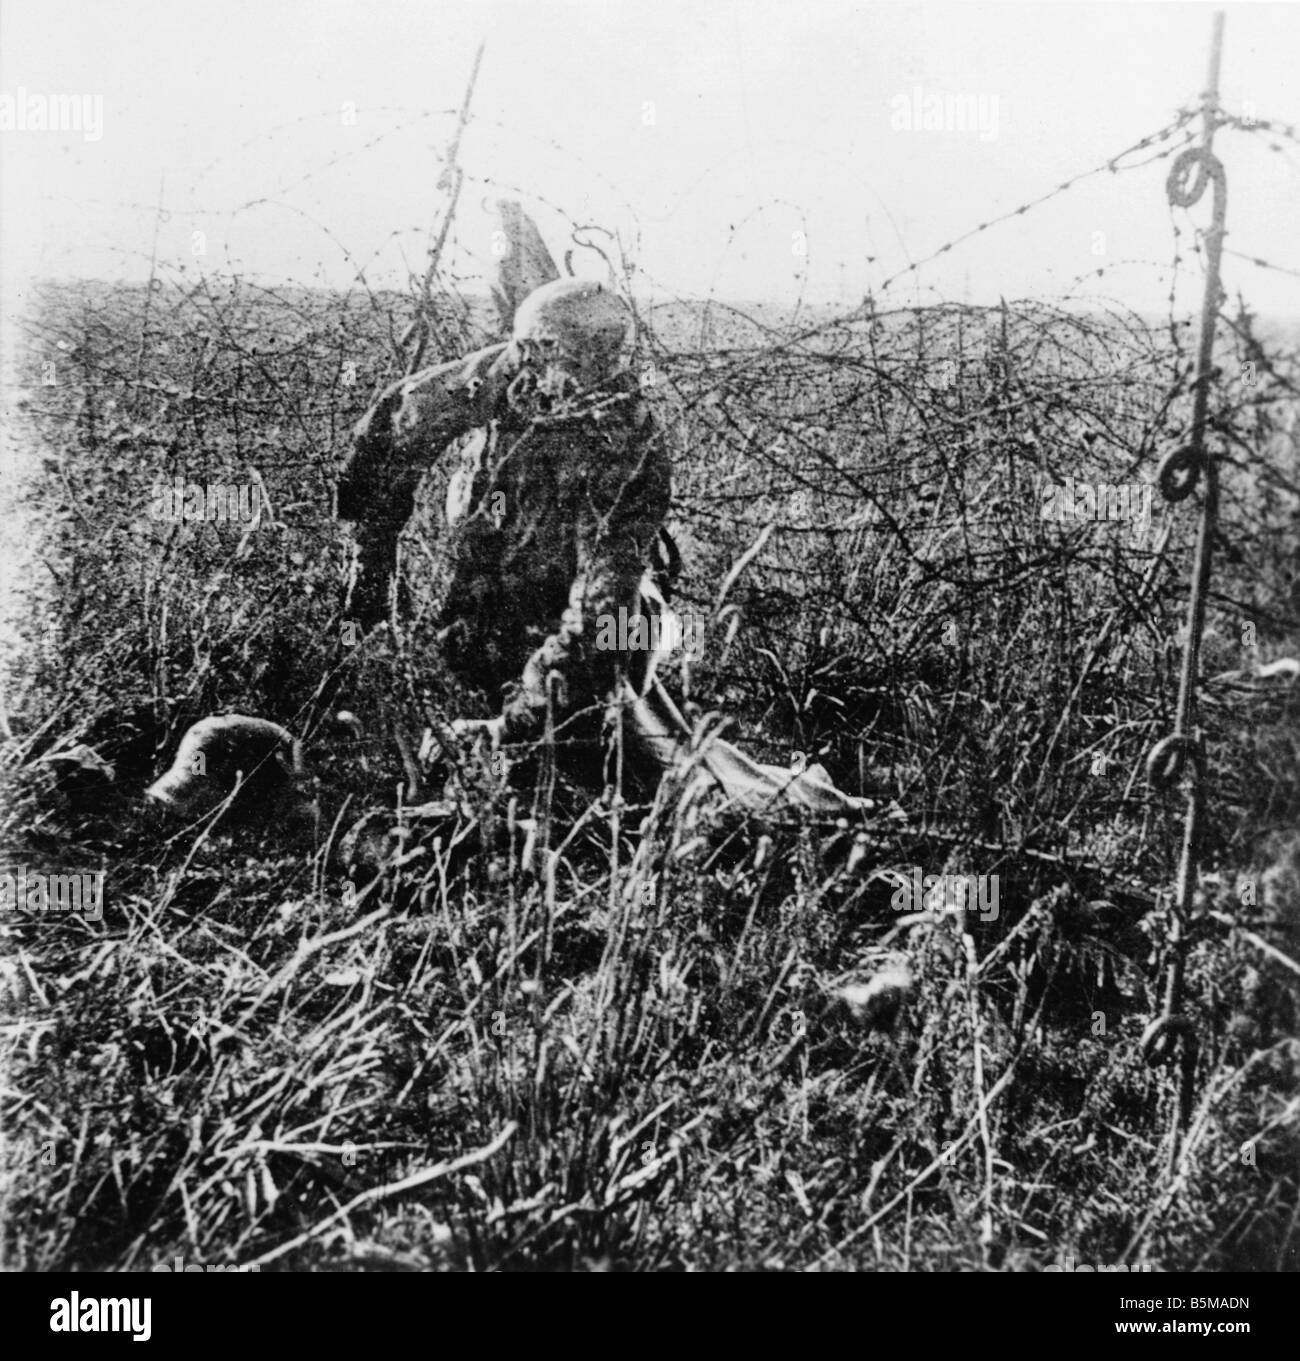 2 G55 W1 1917 3 Body of a German soldier Photo 1917 History WWI Western Front Body of a German soldier in barbed wire Photo no d Stock Photo